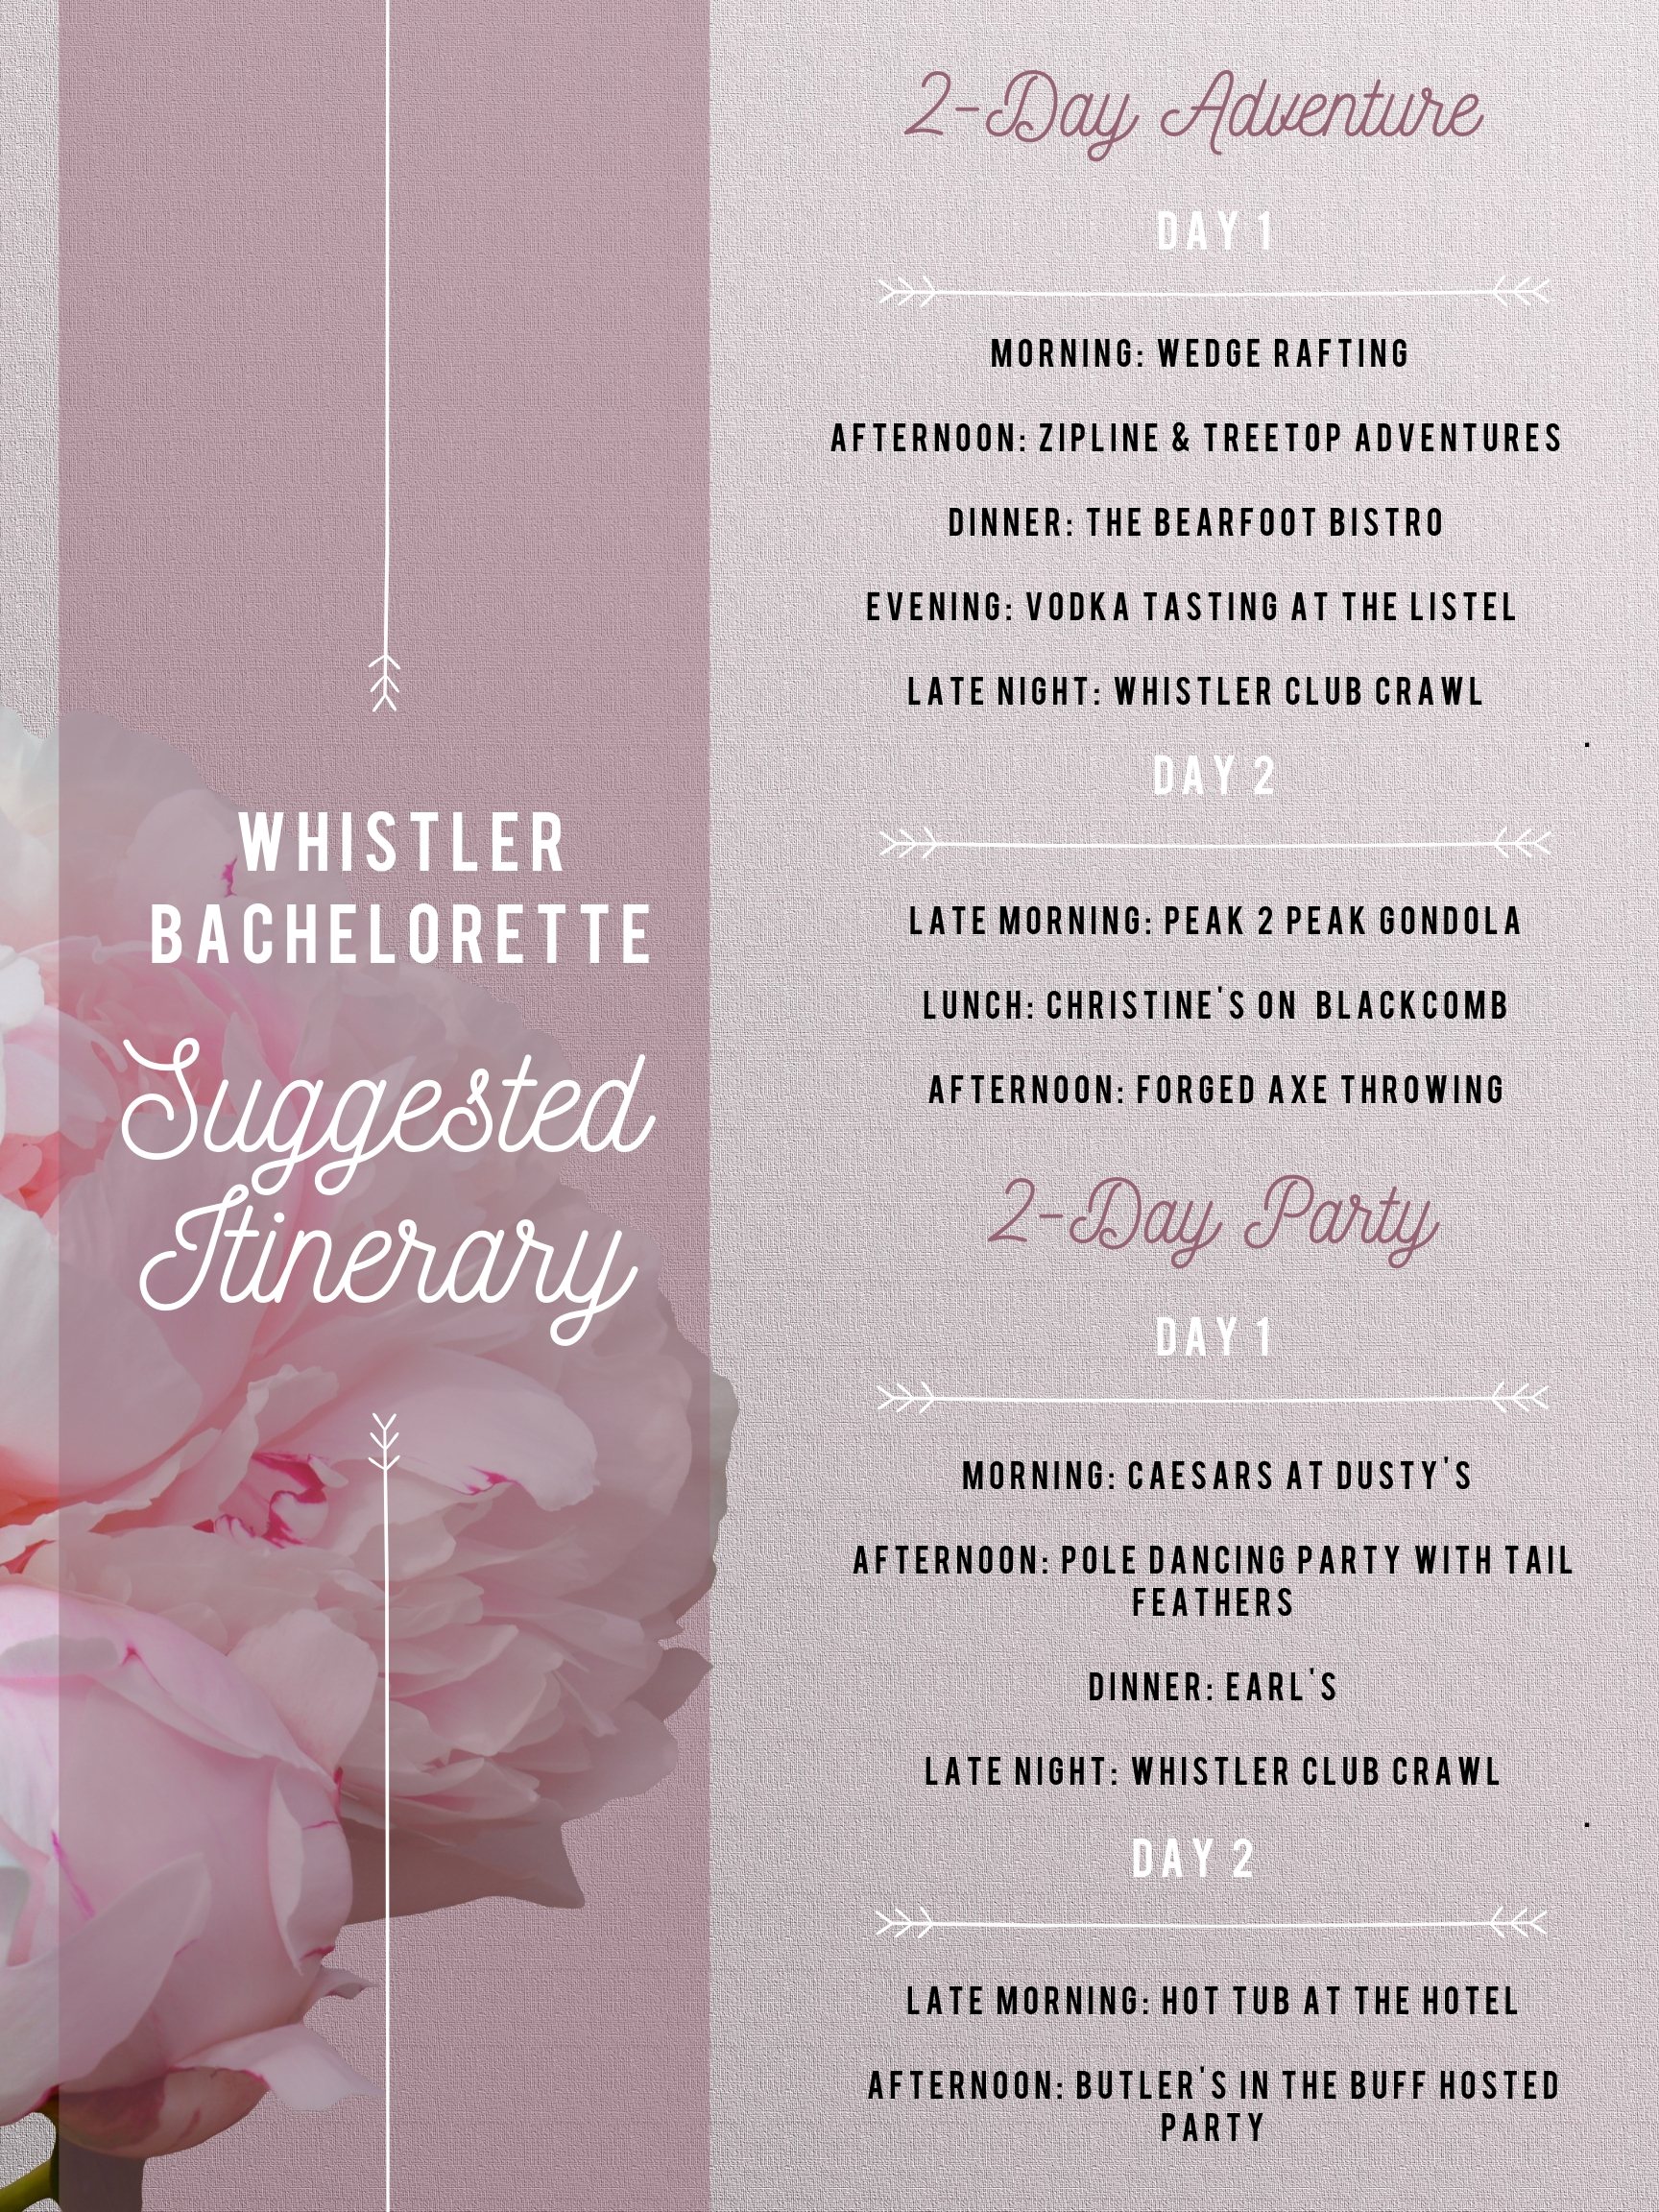 Itinerary for Whistler Bachelorette Infographic